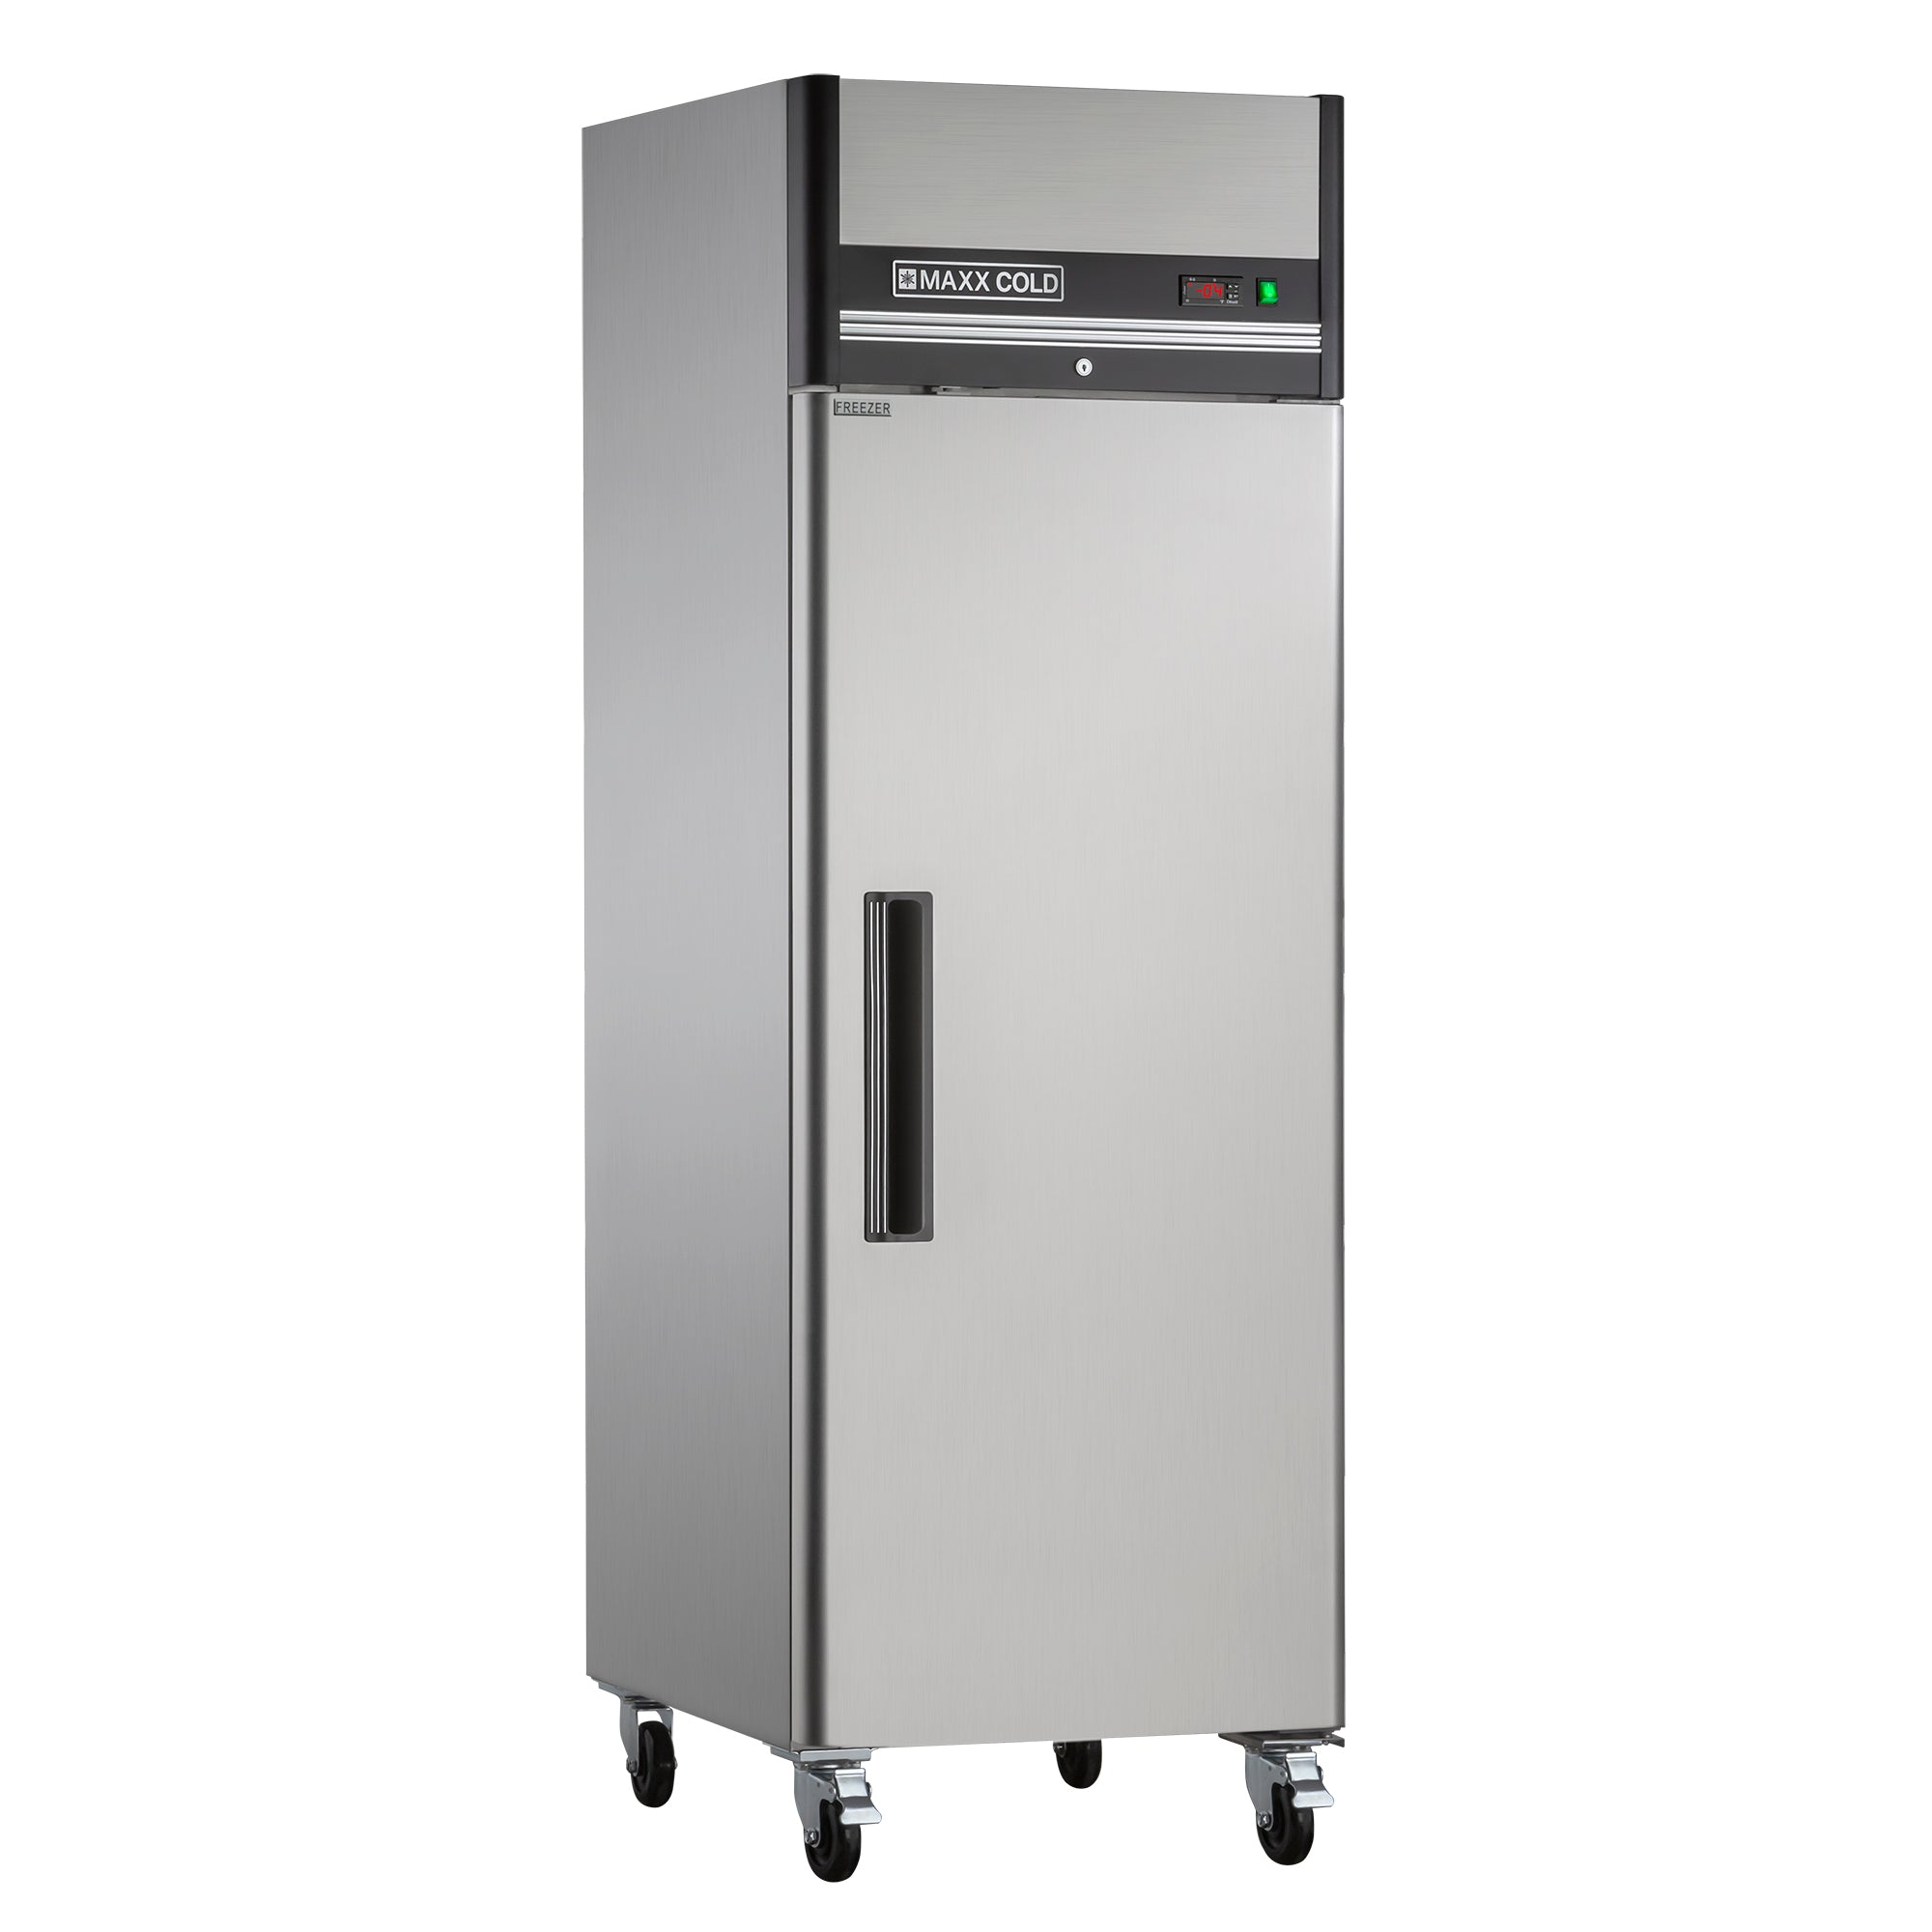 Maxx Cold - MXCF-23FDHC, Maxx Cold Single Door Reach-in Freezer, Top Mount, 26.8"W, 23 cu. ft. Storage Capacity, Energy Star Rated, in Stainless Steel